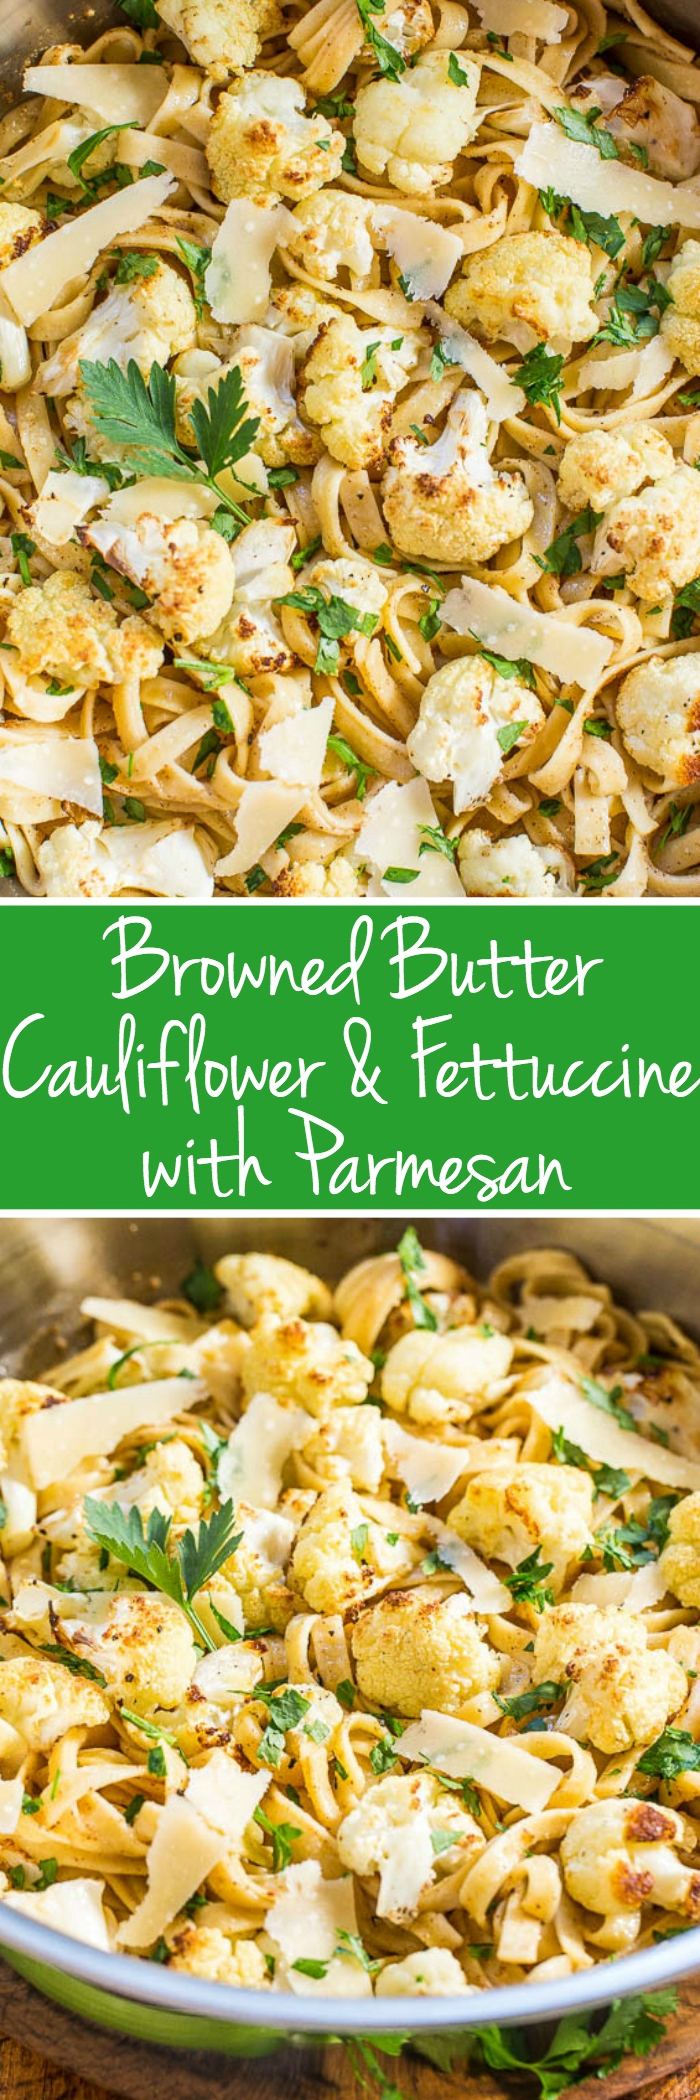 Browned Butter Cauliflower and Fettuccine with Parmesan - The roasted cauliflower is so good tossed with buttery noodles and cheese! Browned butter makes everything taste absolutely AMAZING!! Easy and ready in 30 minutes!